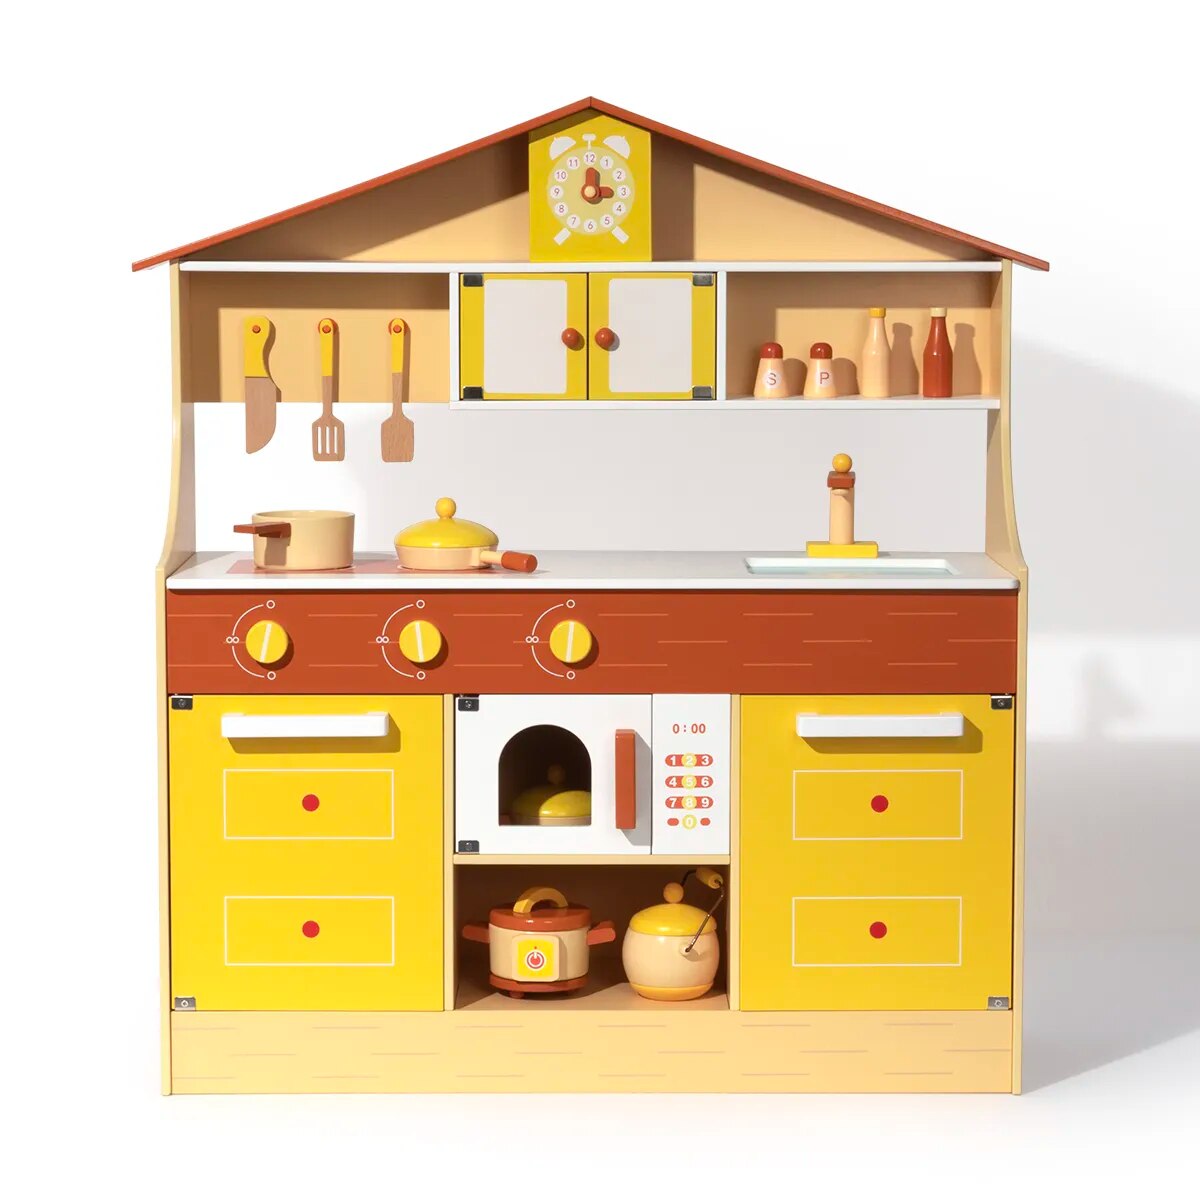 Wooden Play Kitchen Set for Kids & Toddlers, Pretend Play - Budget Friendly